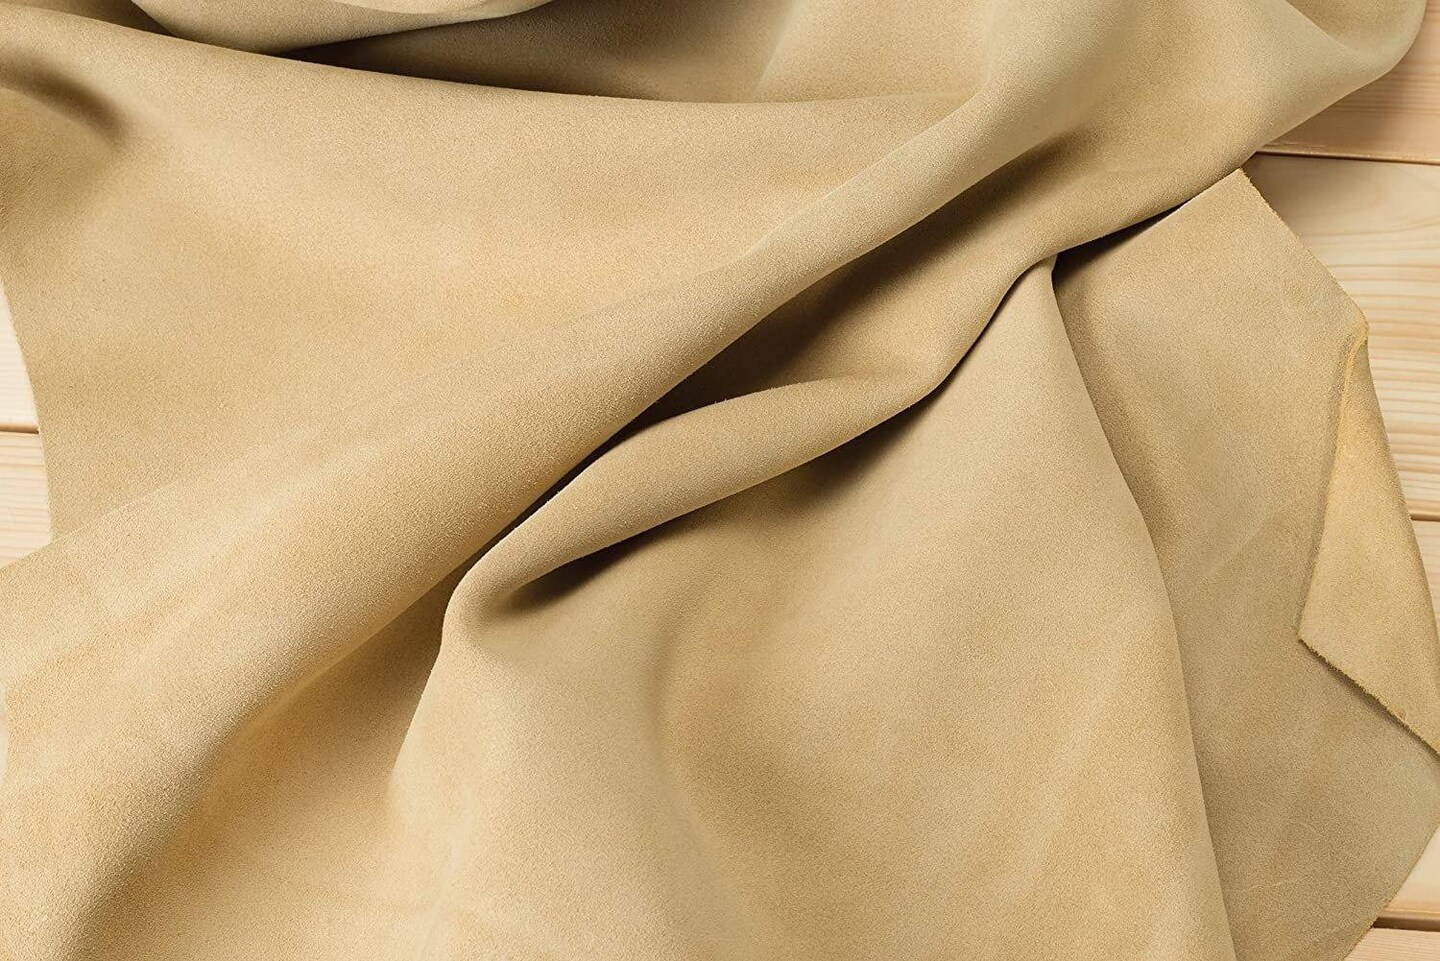 Suede Leather Cowhide 3-4 oz (1.6-1.8mm) 10 SQ FT